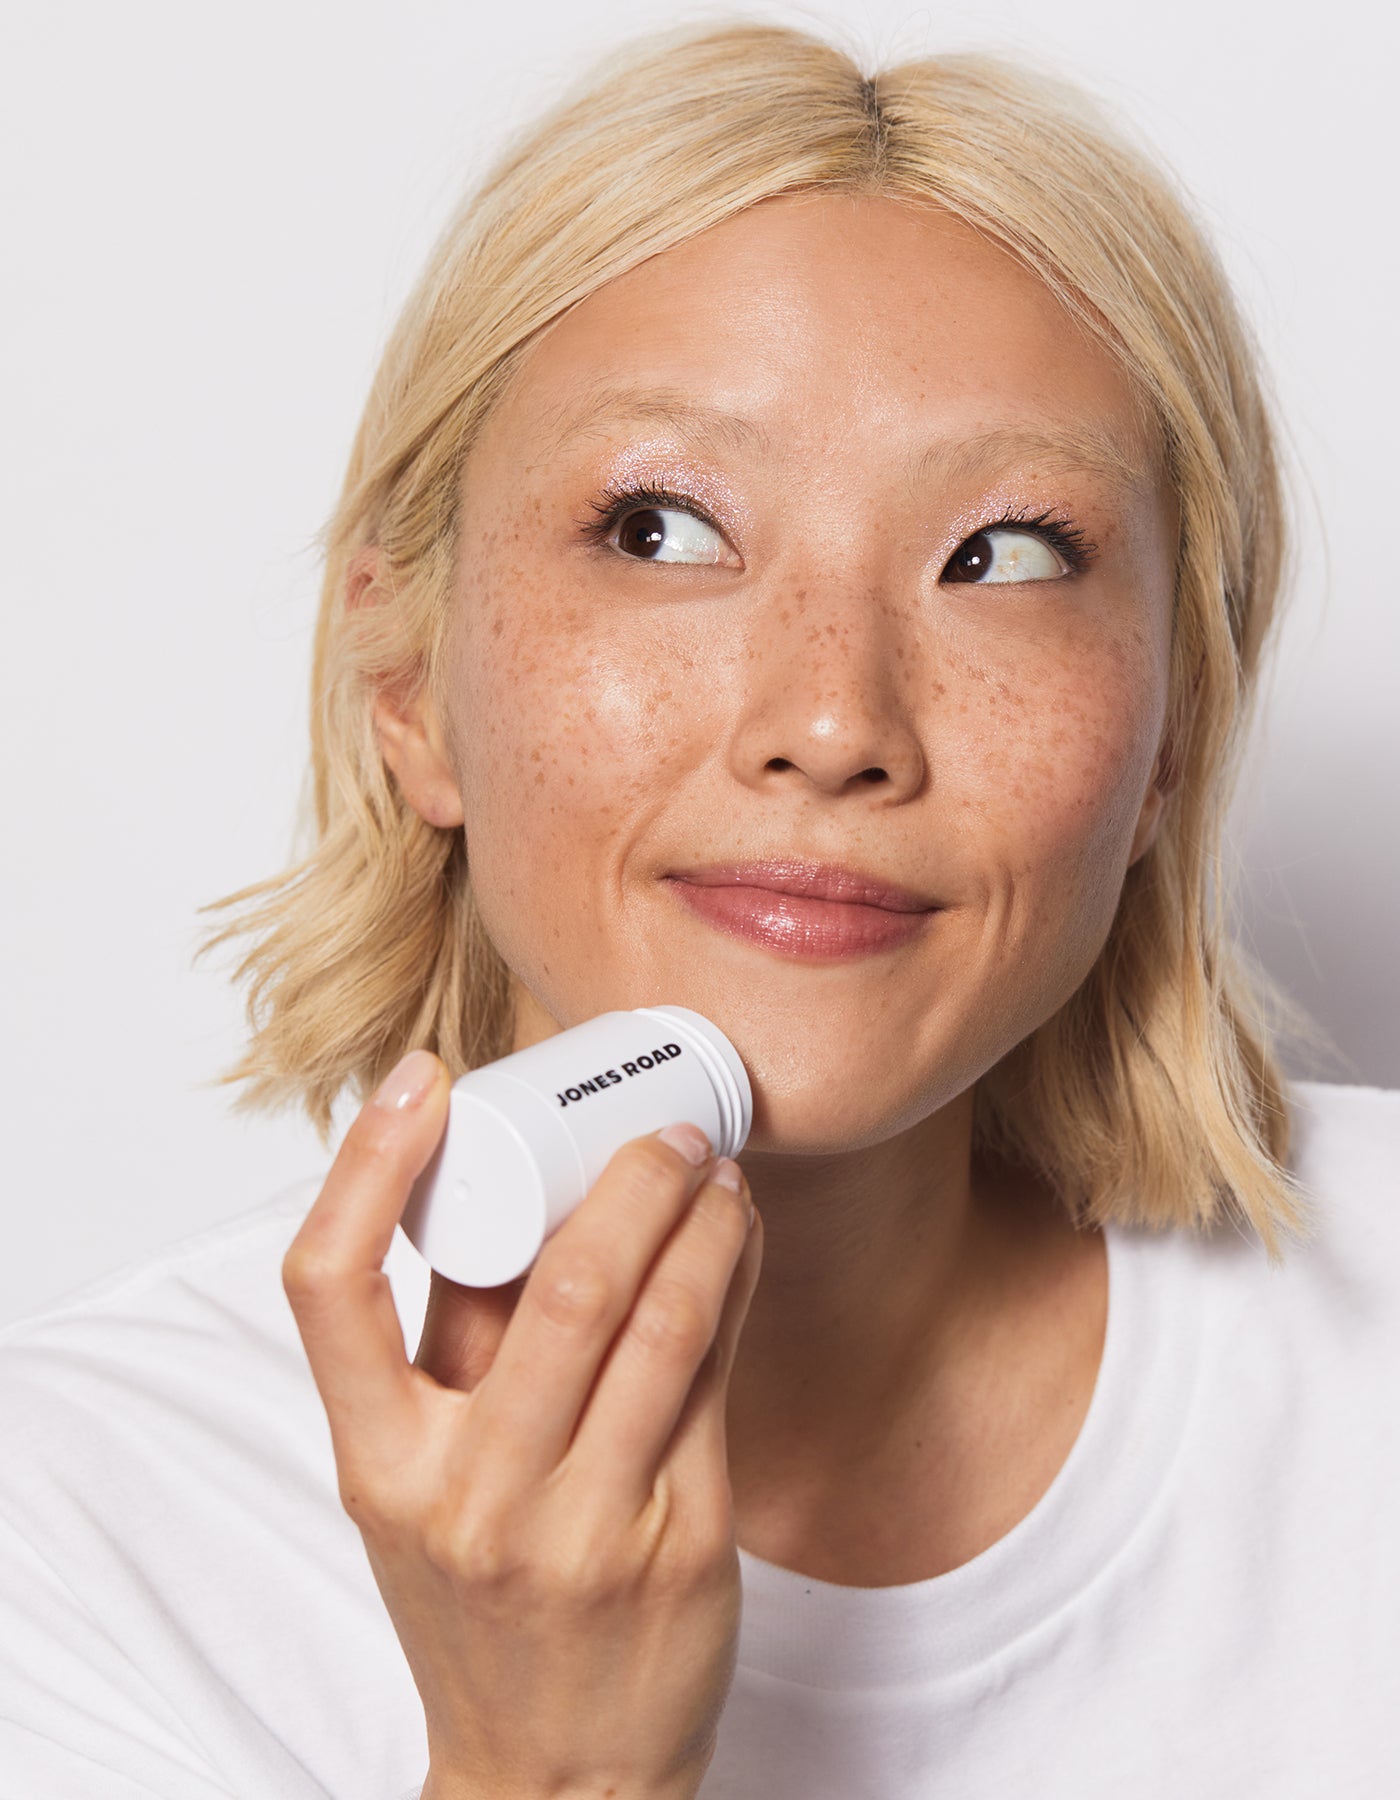 Model using cleansing stick on dry skin